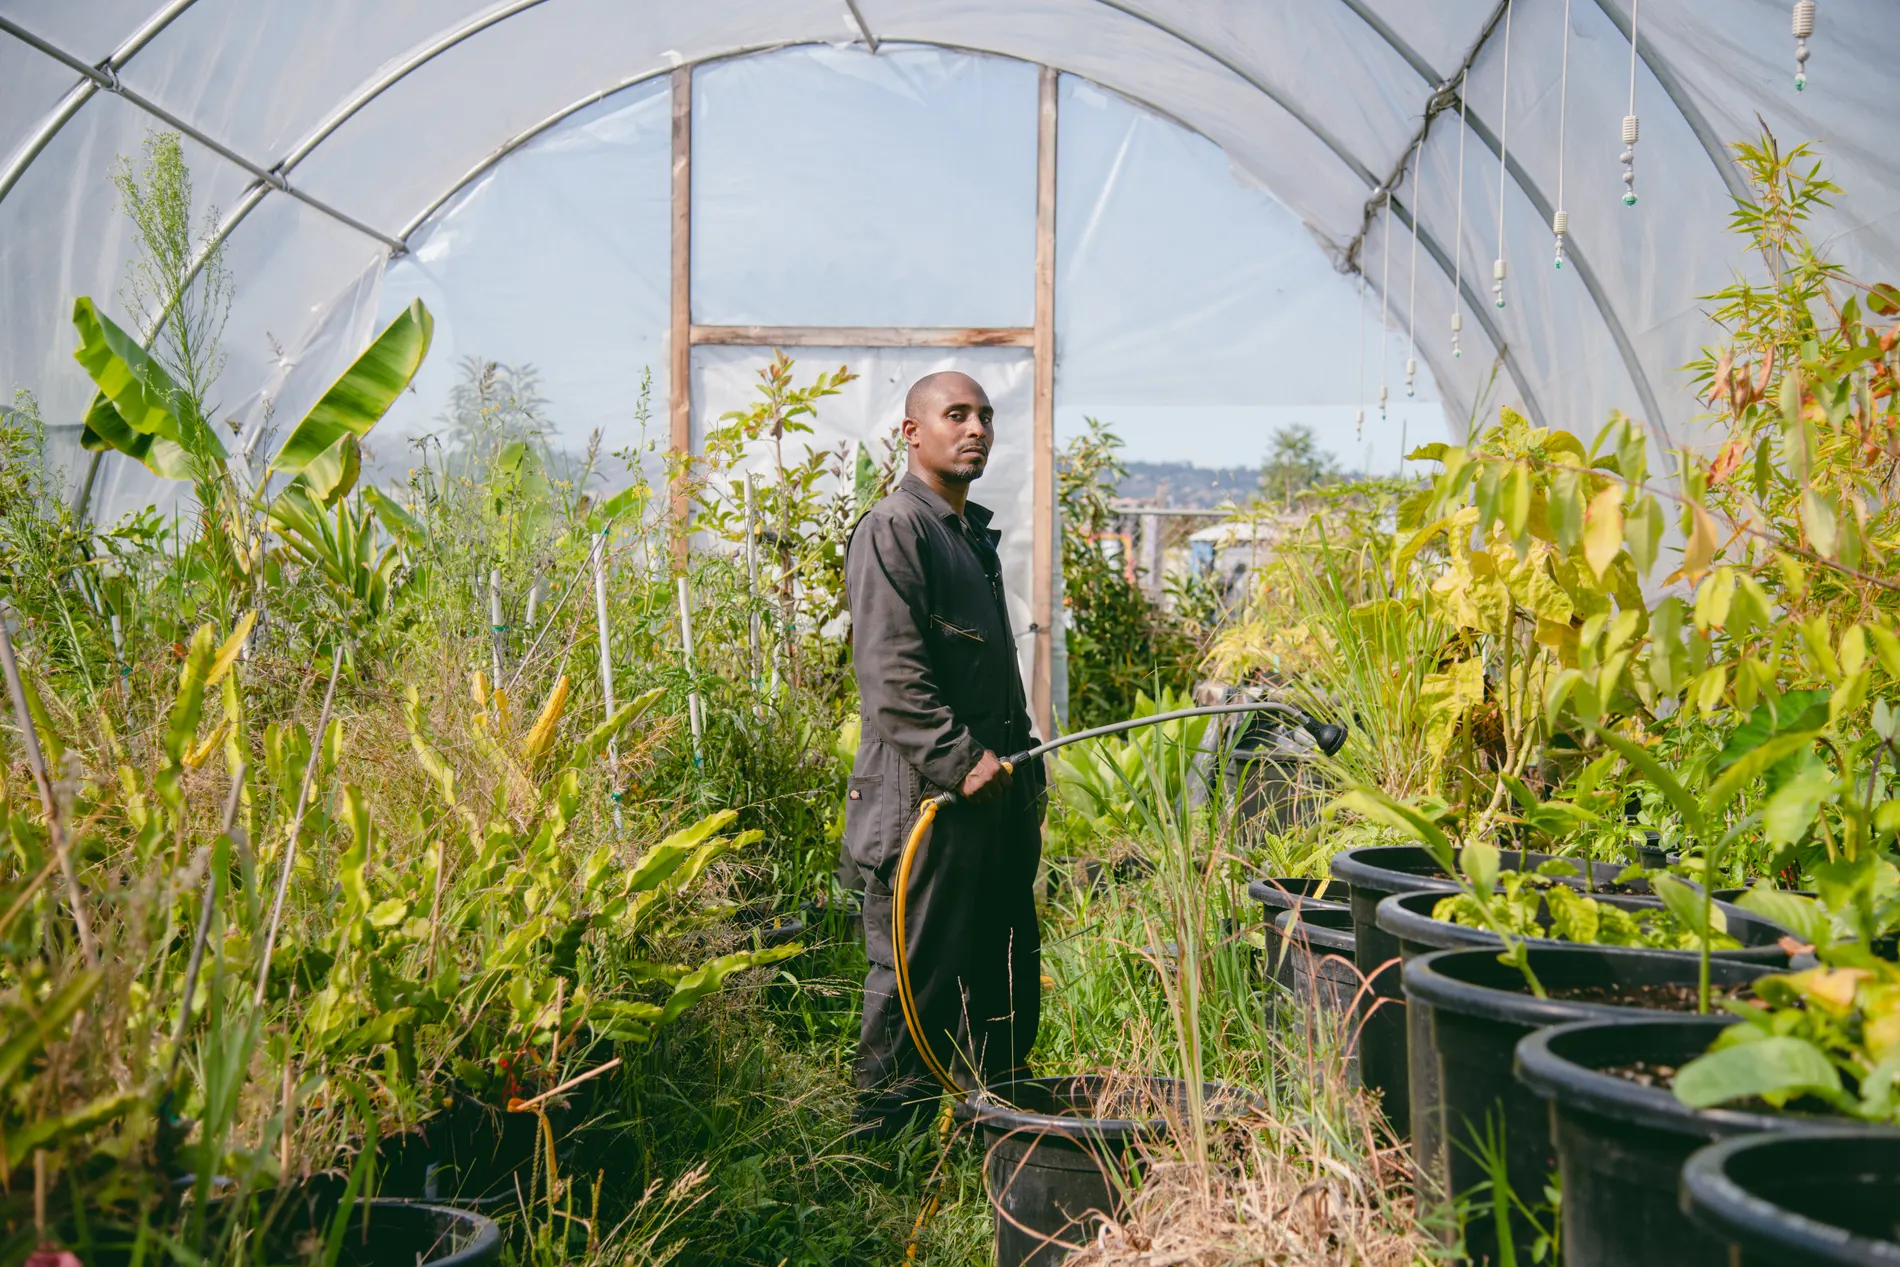 Read more about the article The urban garden transforming lives after prison: ‘I’m finally free’